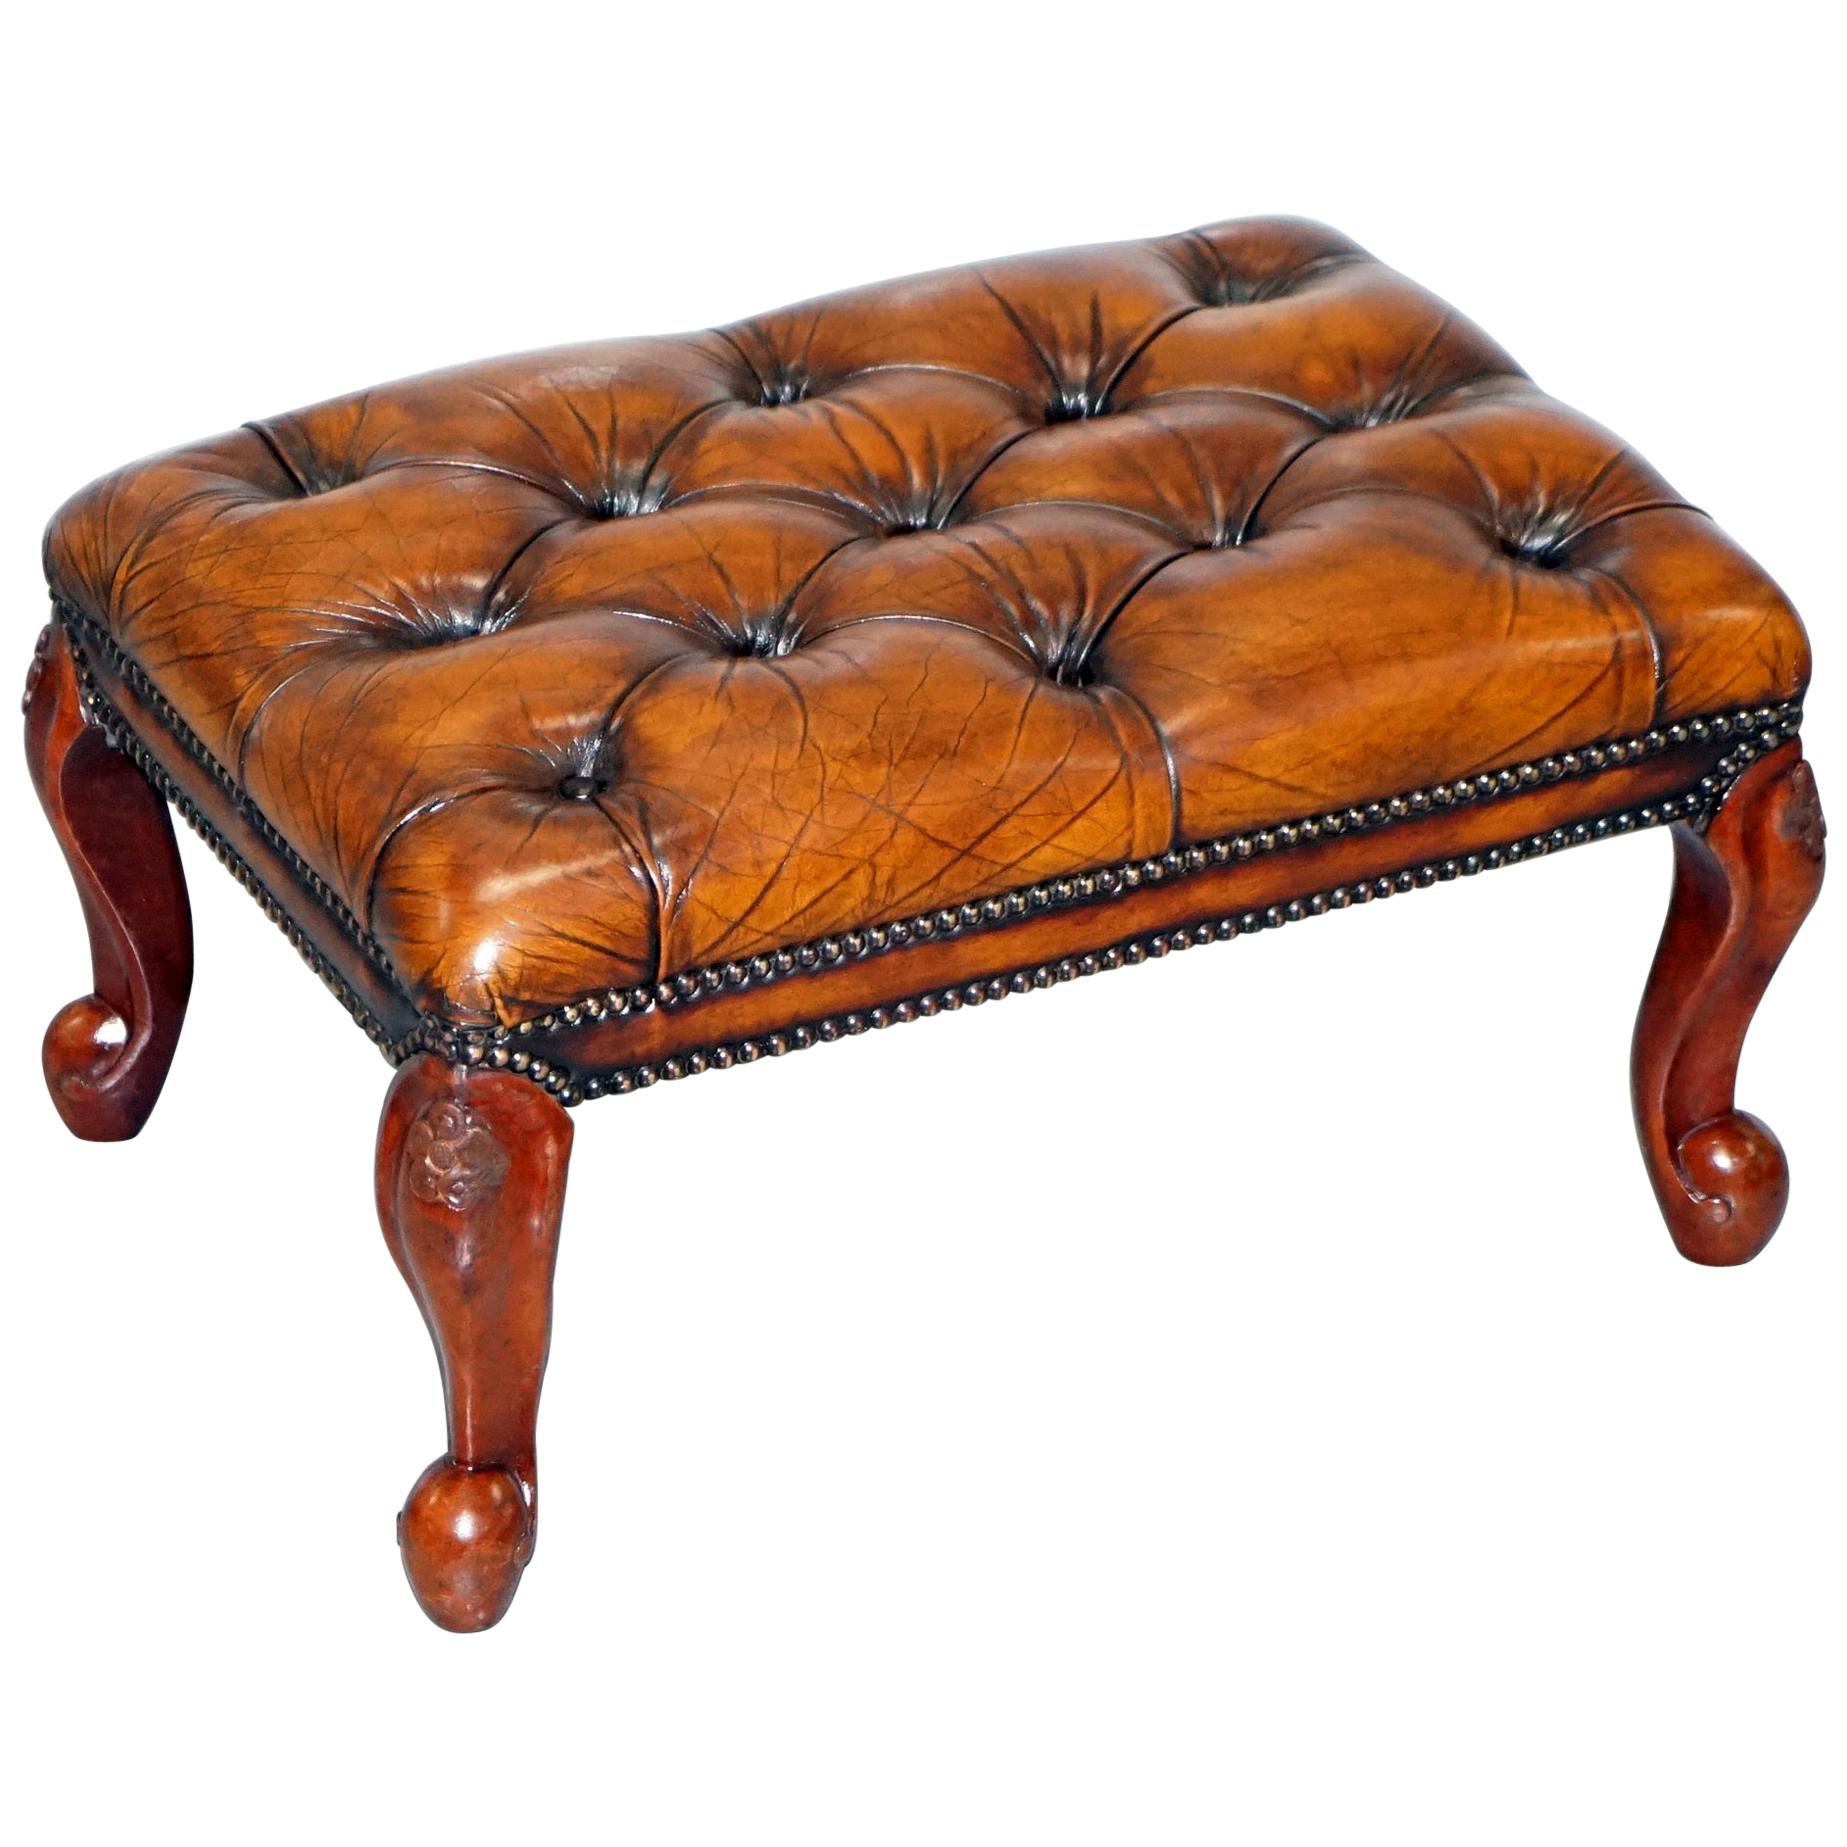 Stunning Fully Restored Hand Dyed Brown Leather Chesterfield Footstool Ornate